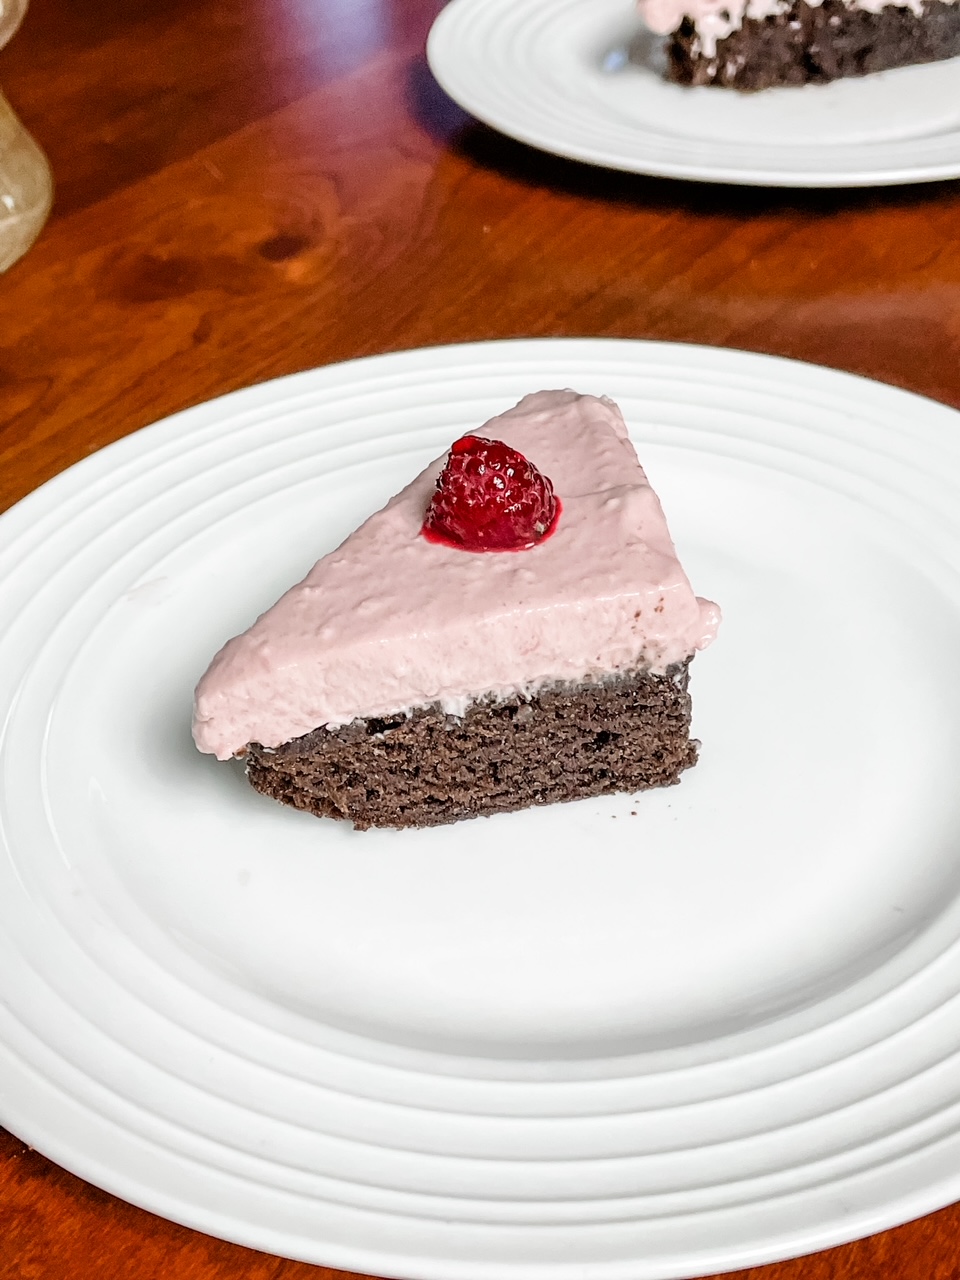 The plated Easy Raspberry Chiffon Brownie Cake cut into triangles